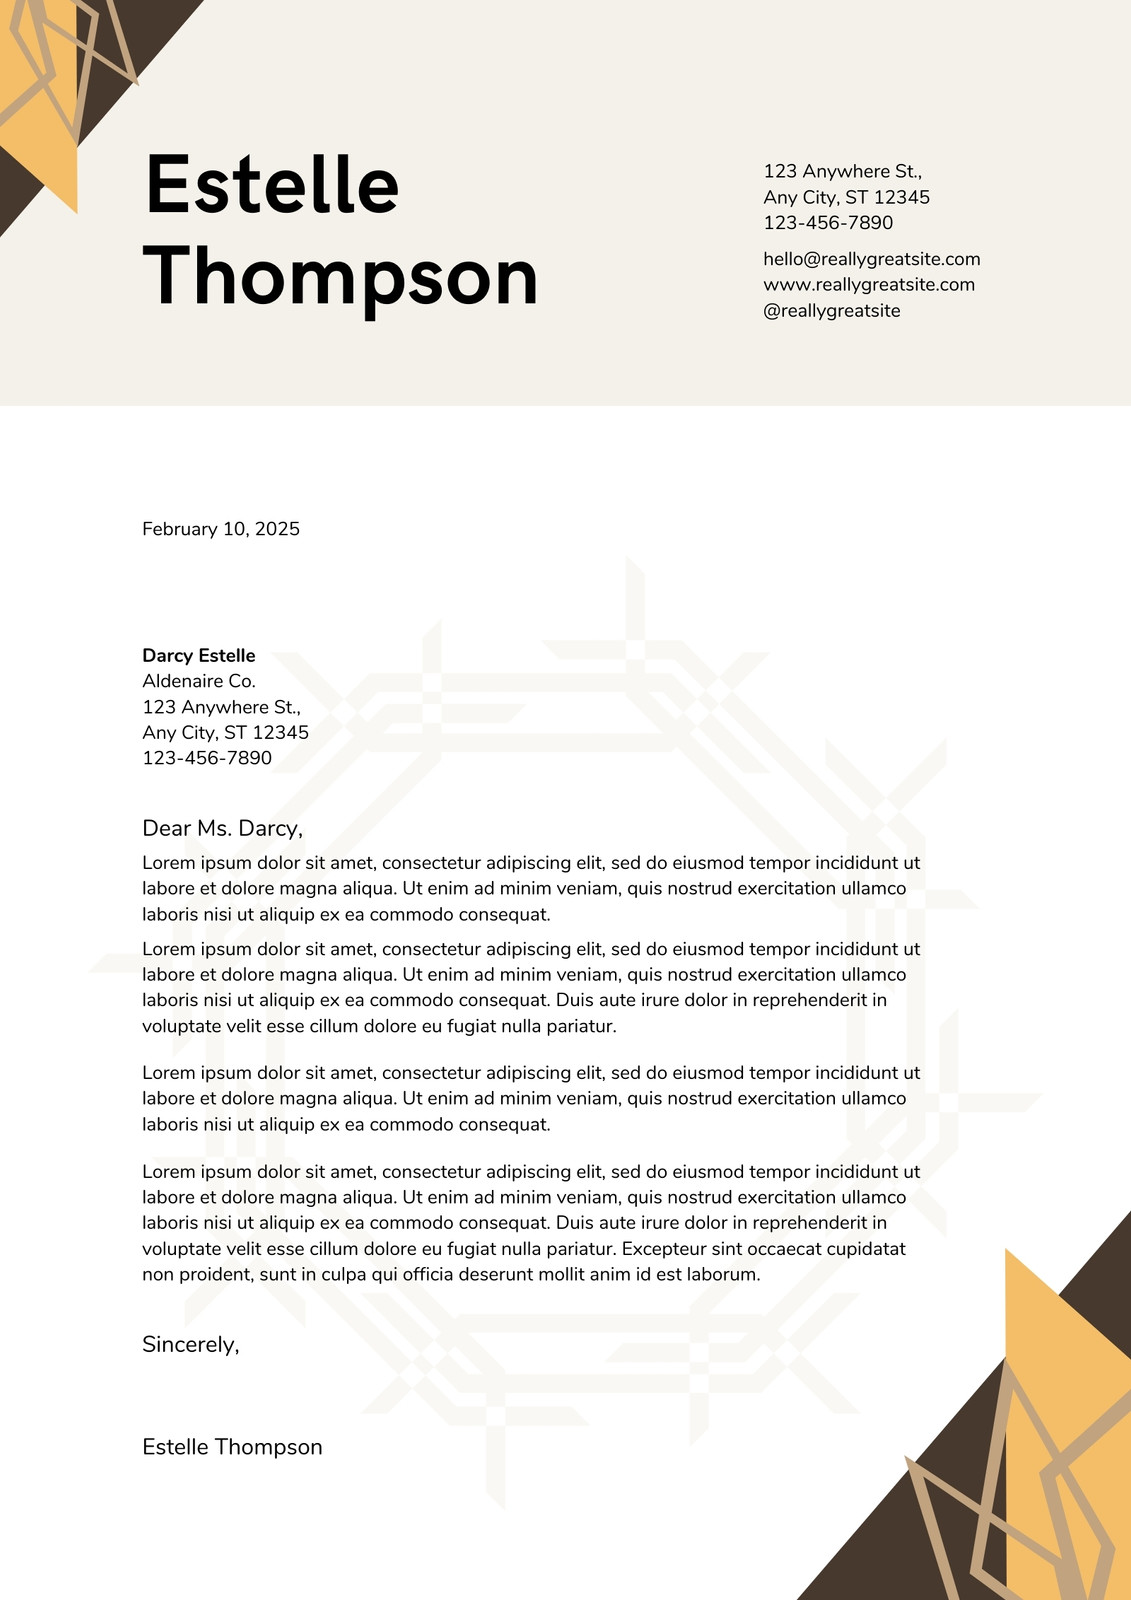 Free printable cover letter templates you can customize | Canva